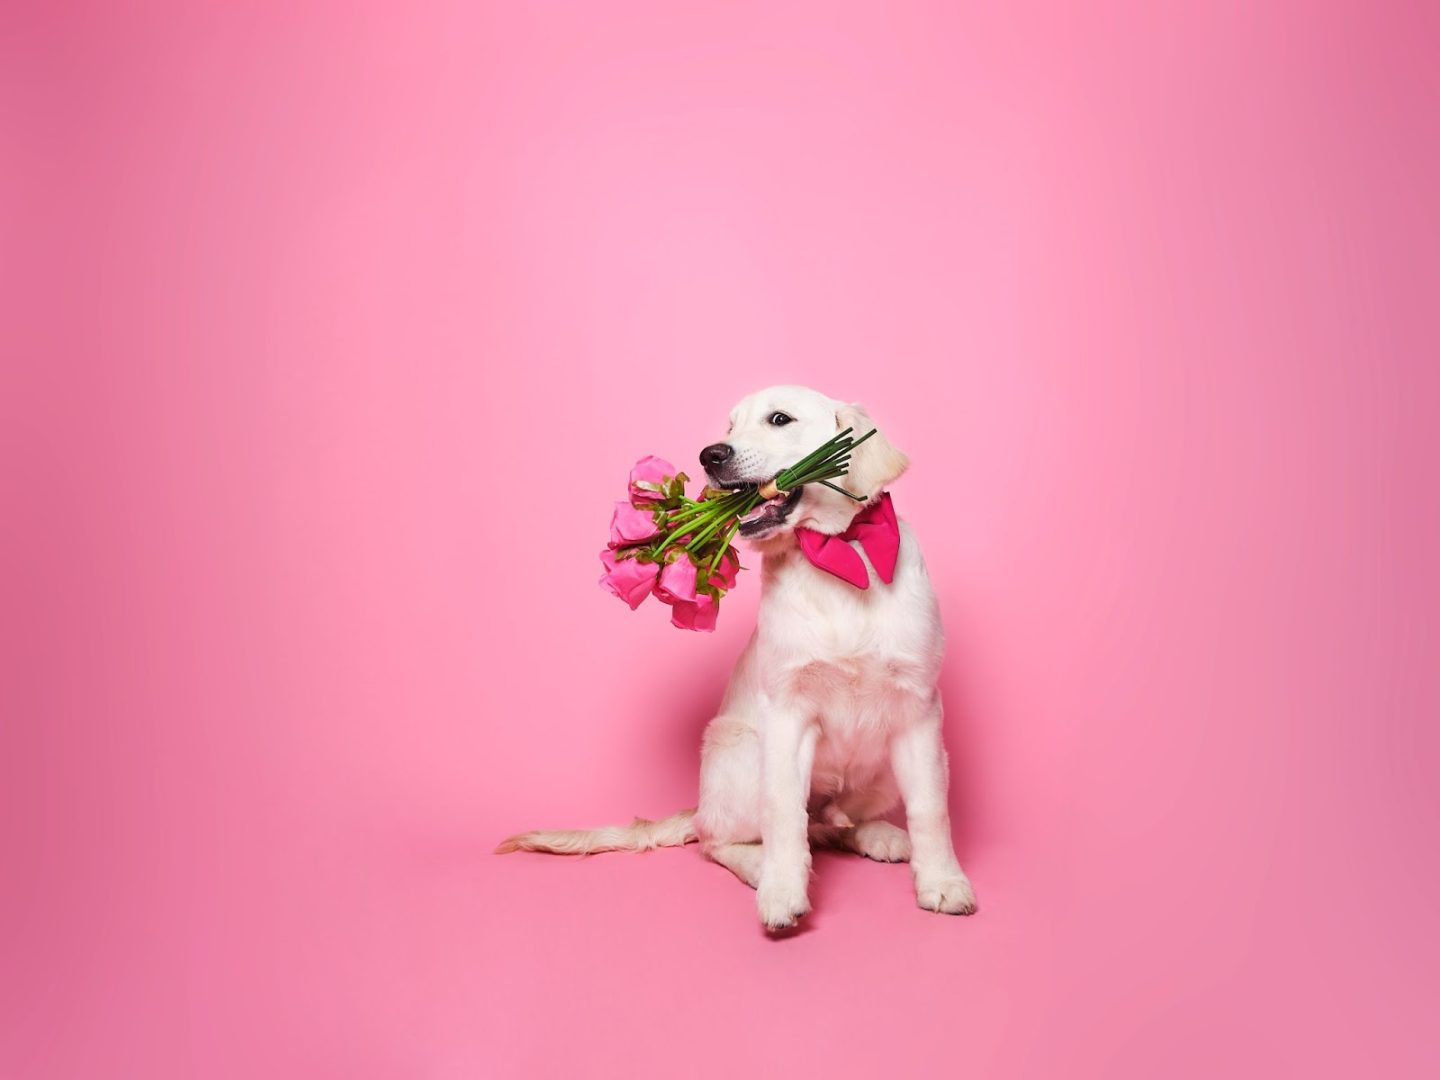 Dog with flowers on mouth in pink background